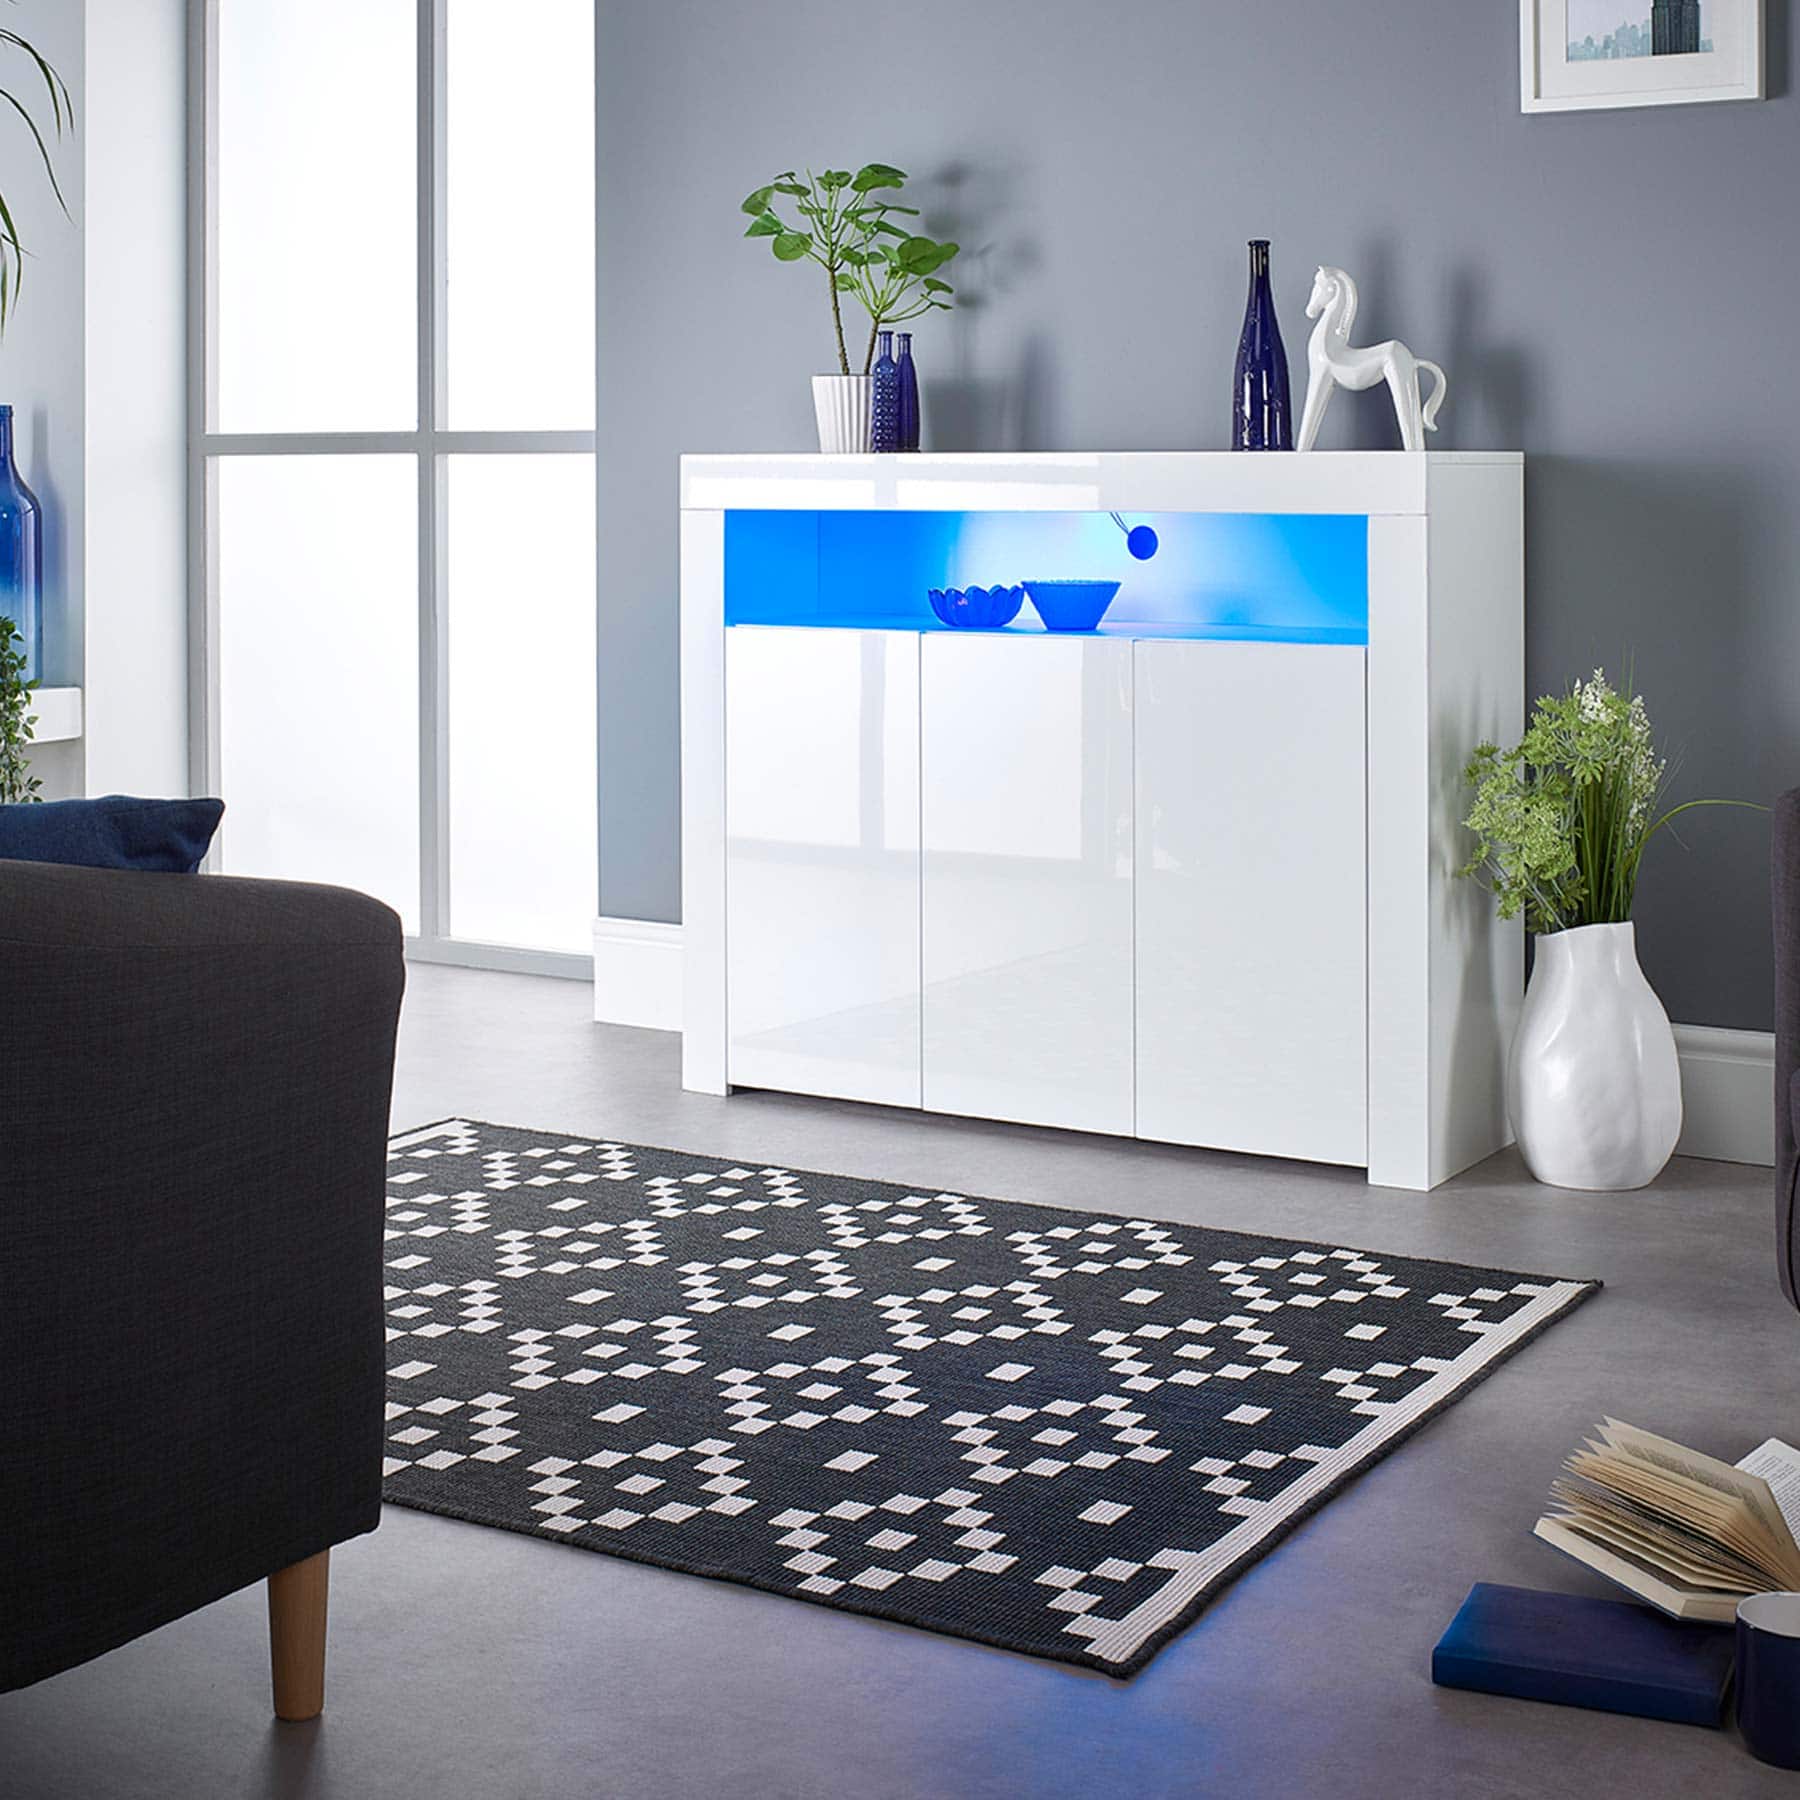 Wido 2 Door White Gloss Sideboard With LED Lighting Cabinet Cupboard Furniture Living Room Storage 